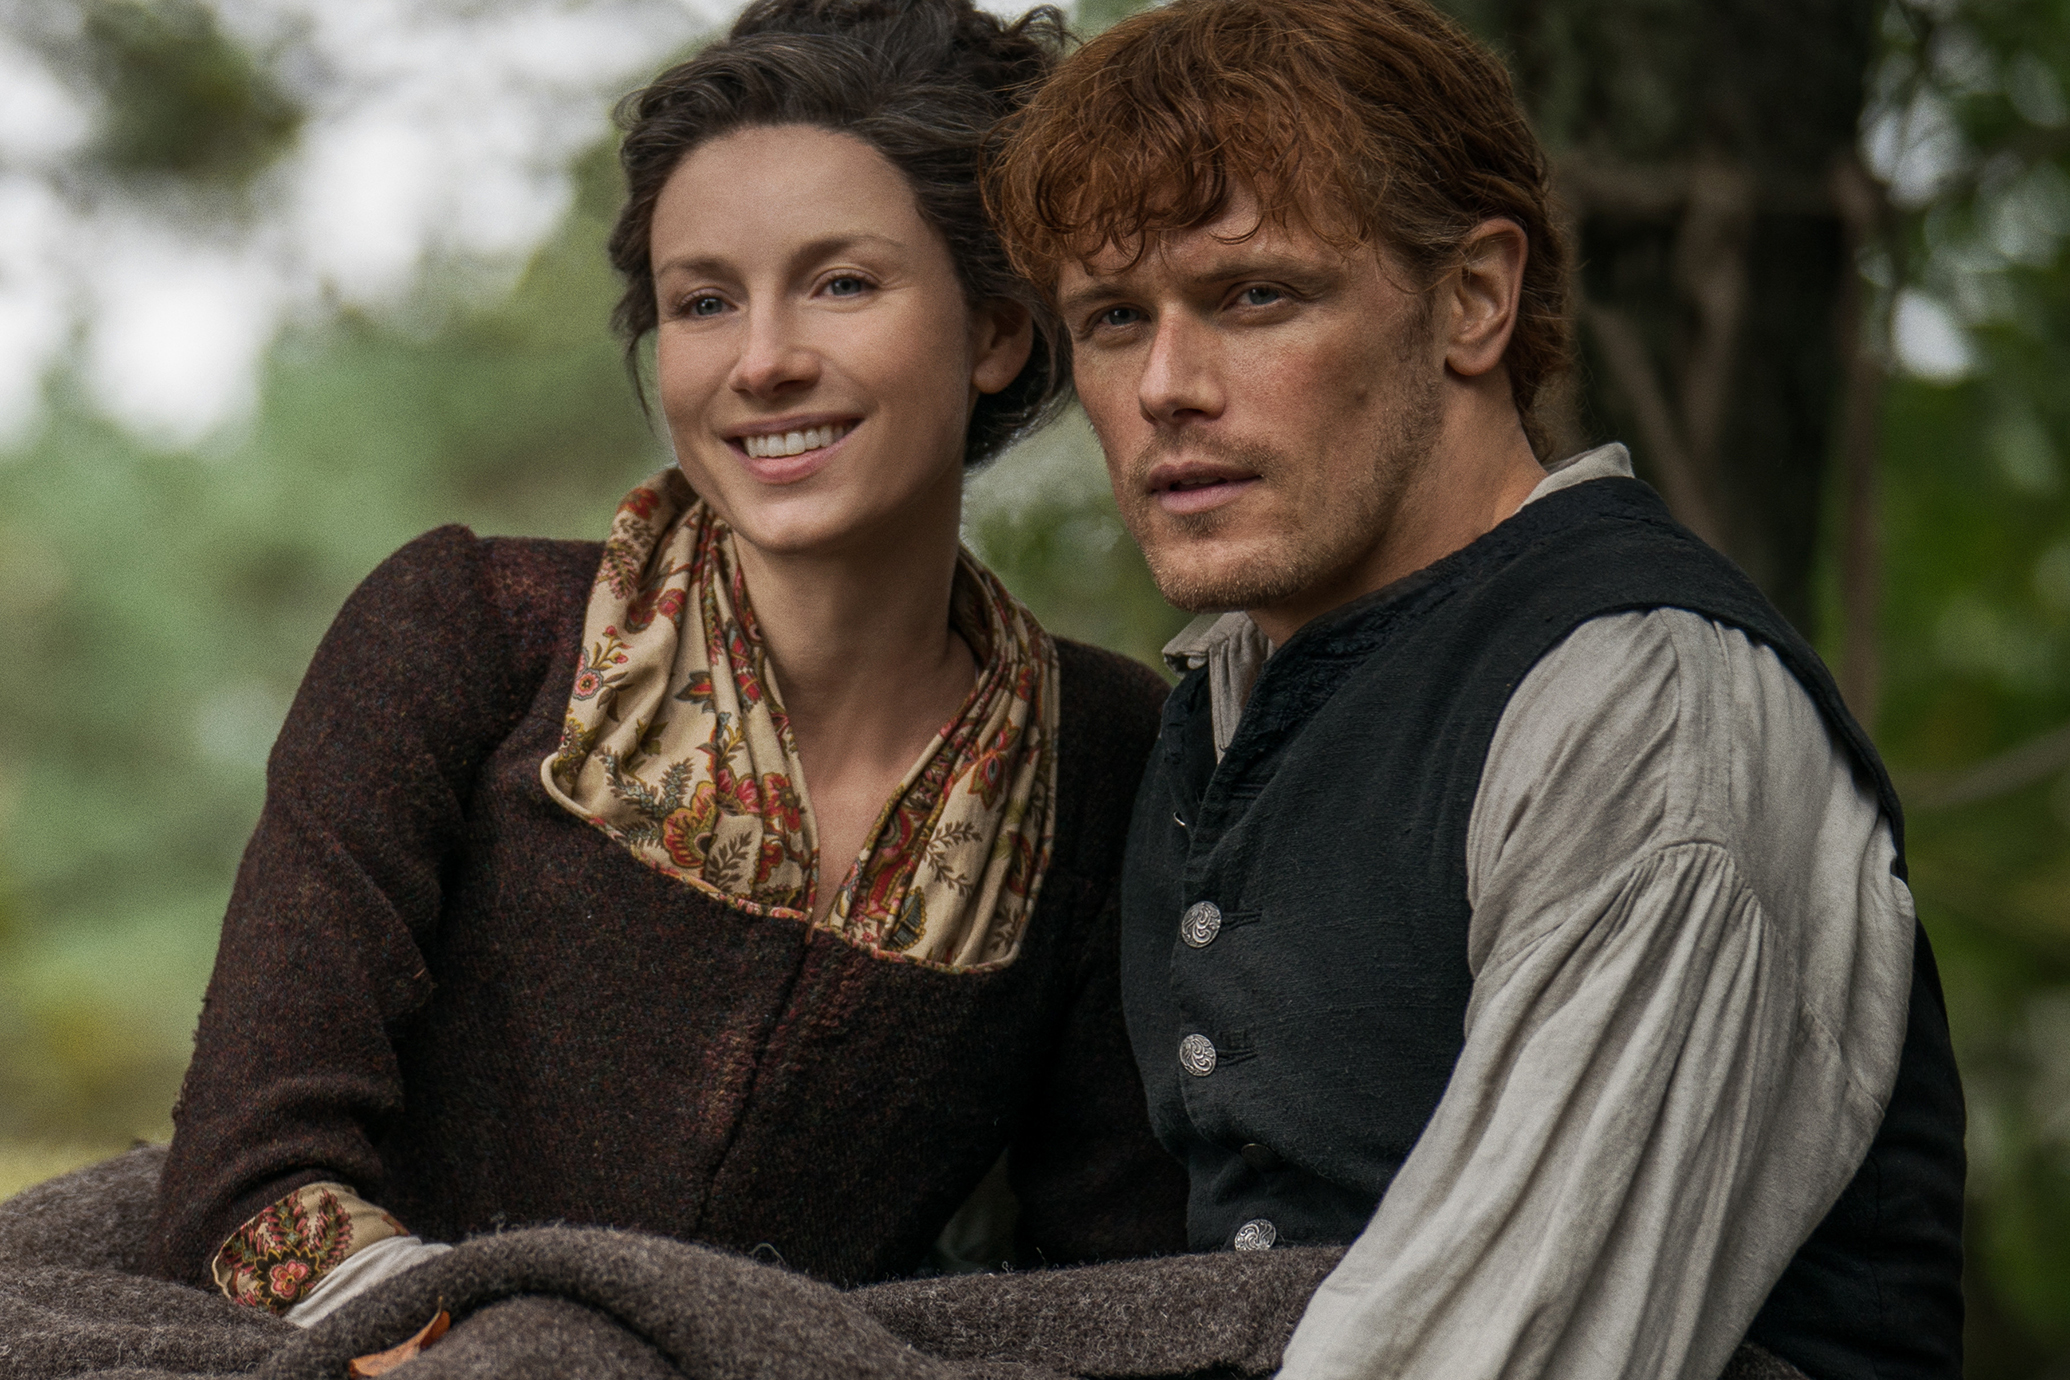 outlander-season-4-review-jamie-and-claire-settle-in-america-tv-guide